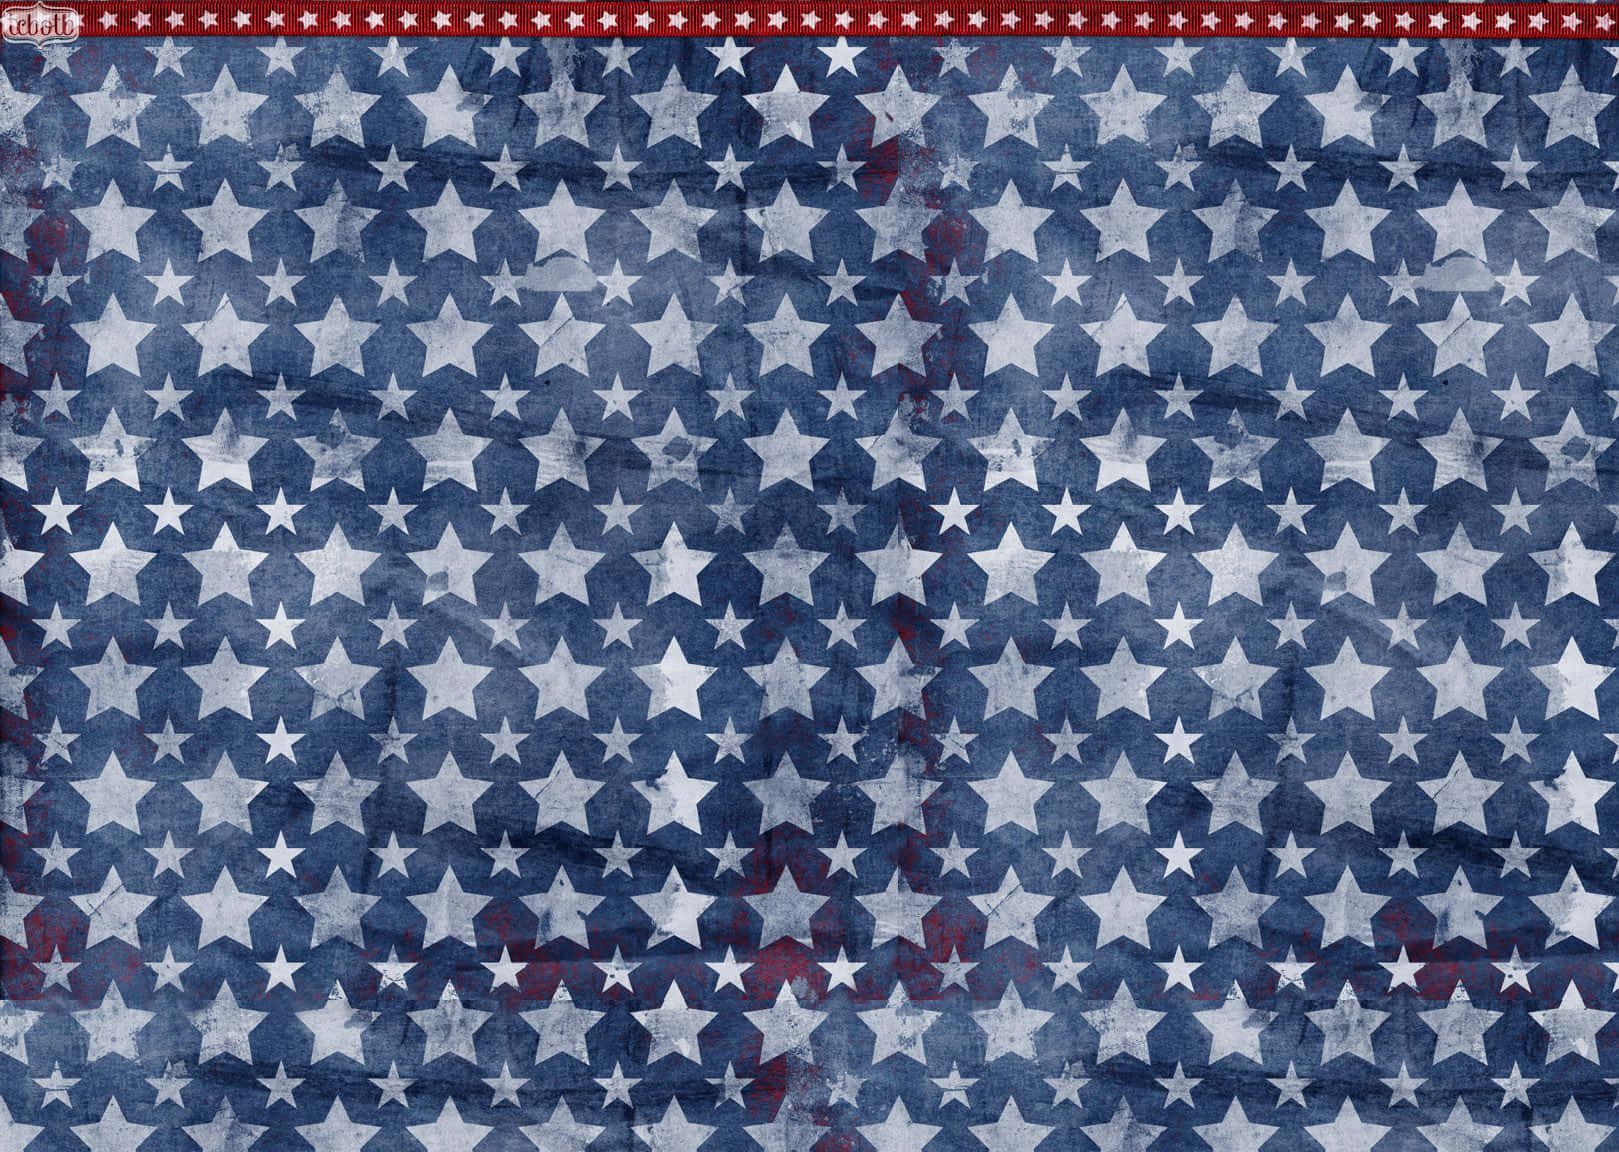 Show your patriotic spirit with a cute 4th of July background!